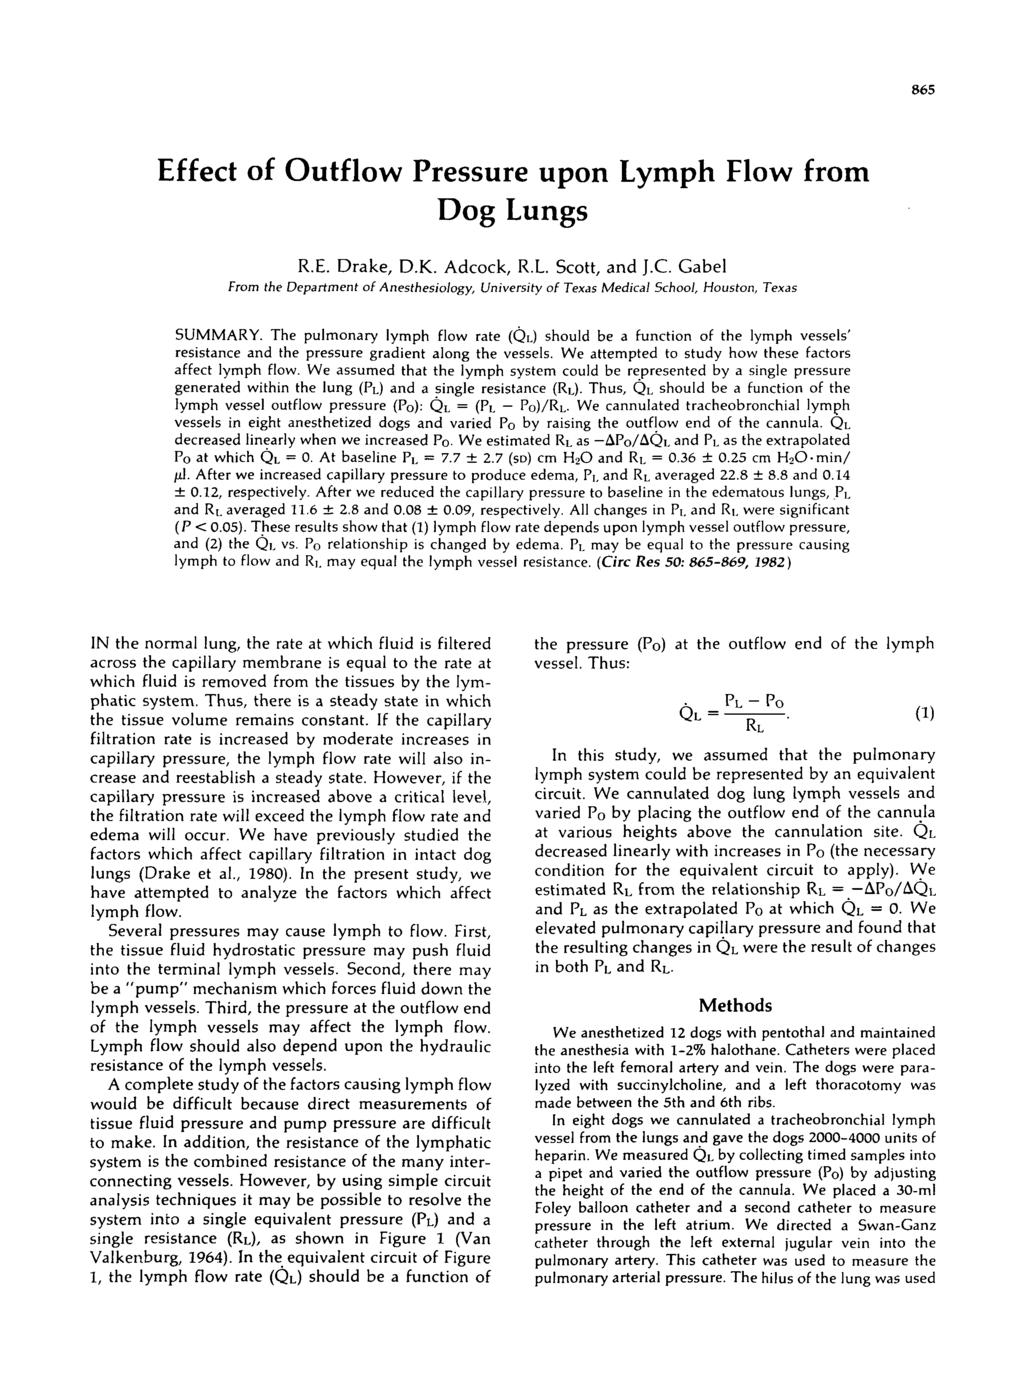 Effect of Outflow Pressure upon Lymph Flow from Dog Lungs R.E. Drake, D.K. Adcock, R.L. Scott, and J.C.